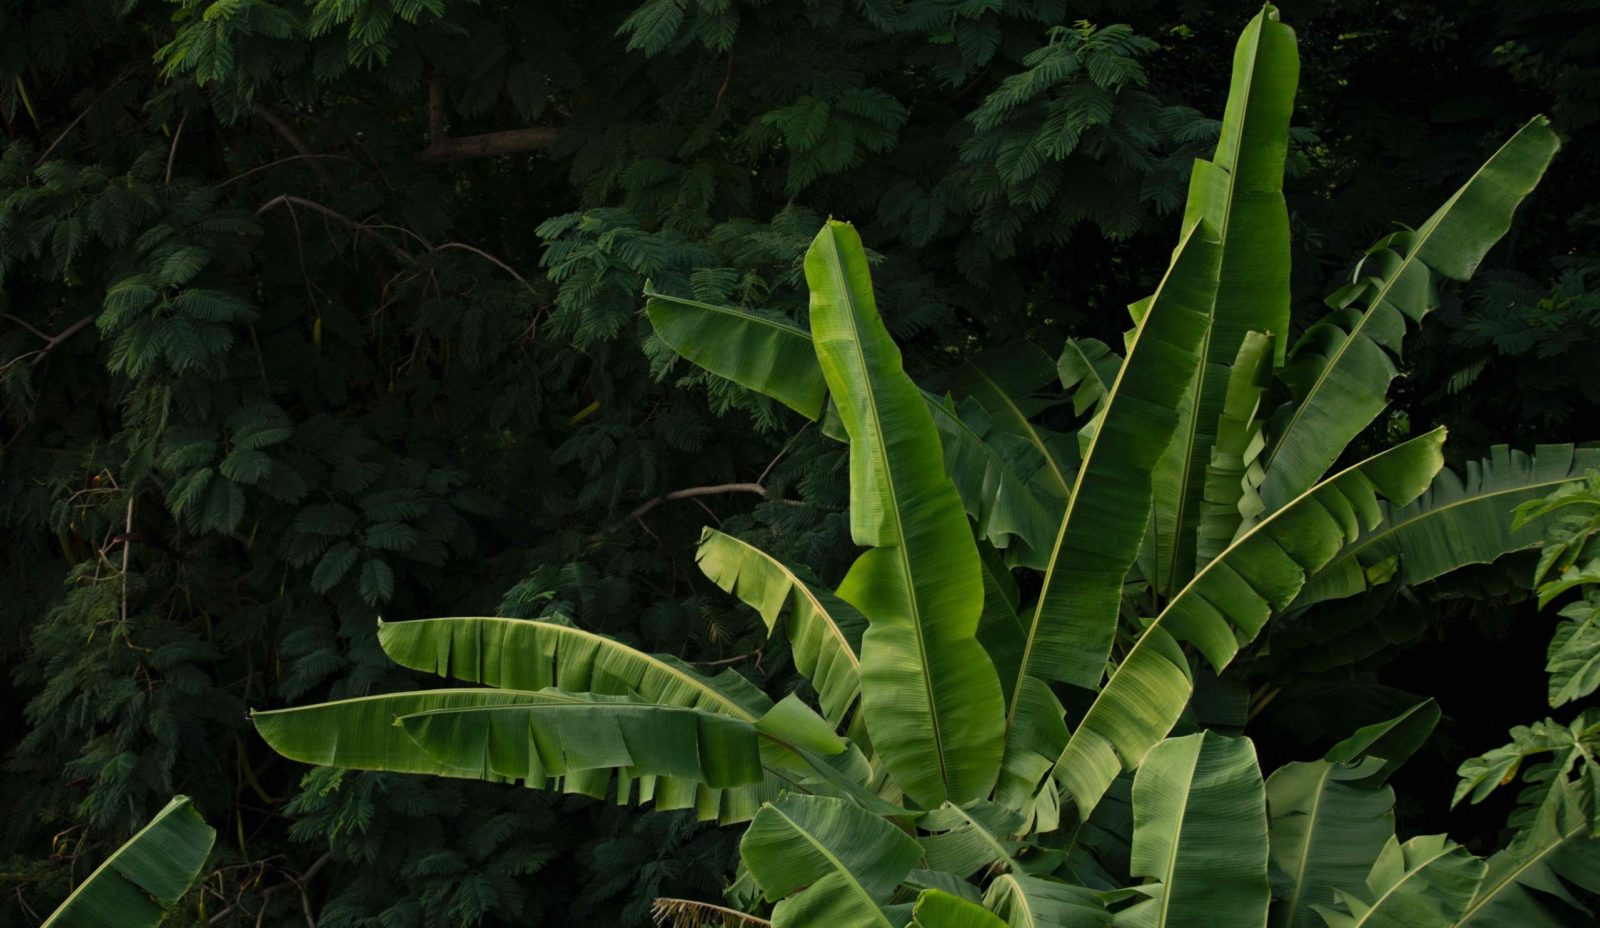 Long green leaves on a banana tree in the garden at Cosmos St Lucia, seen against a background of darker green foliage